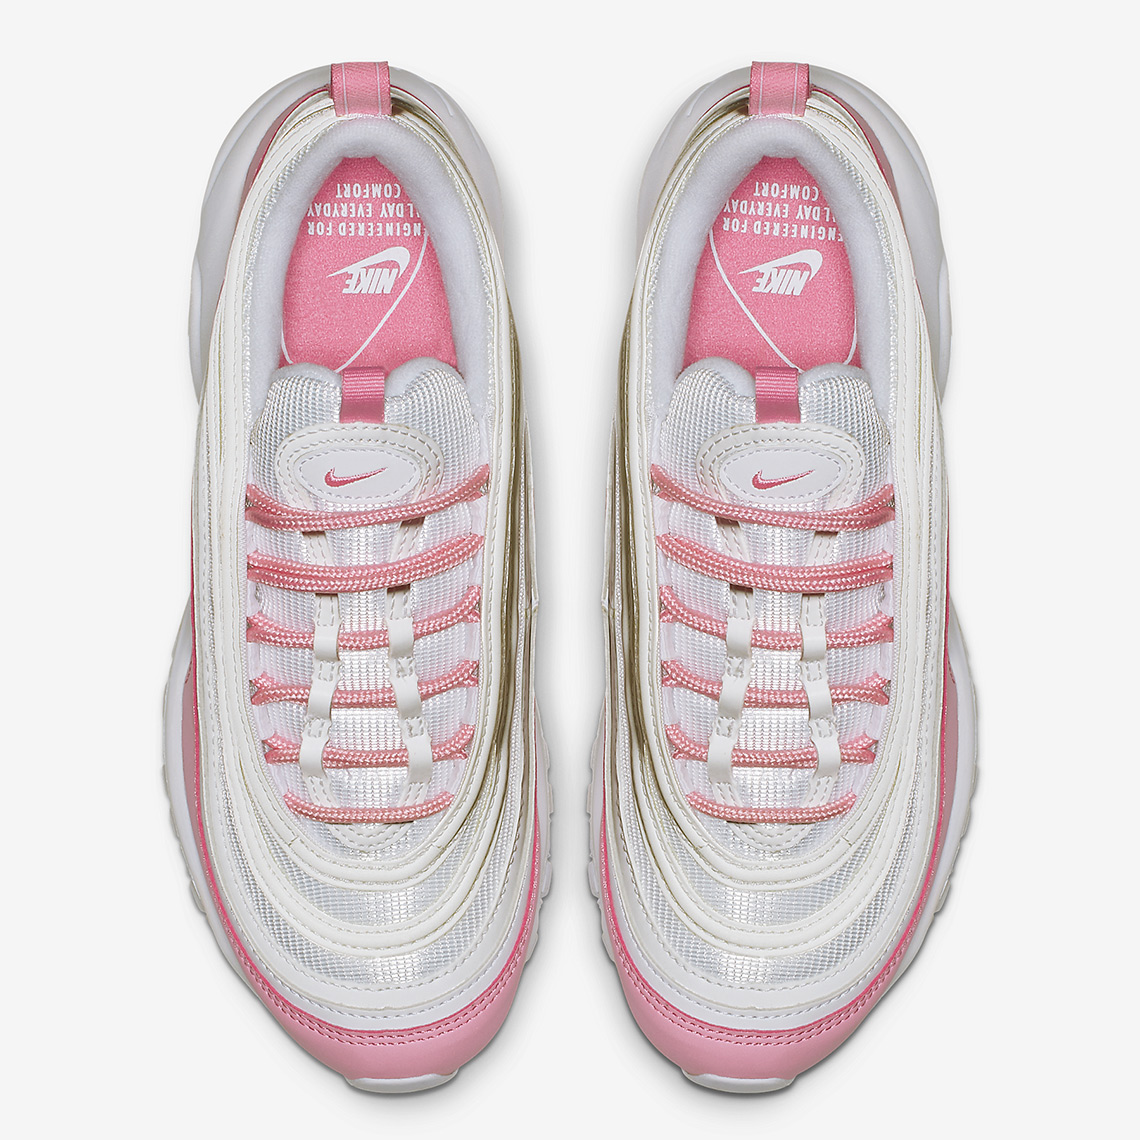 nike air max 97 psychic pink release date